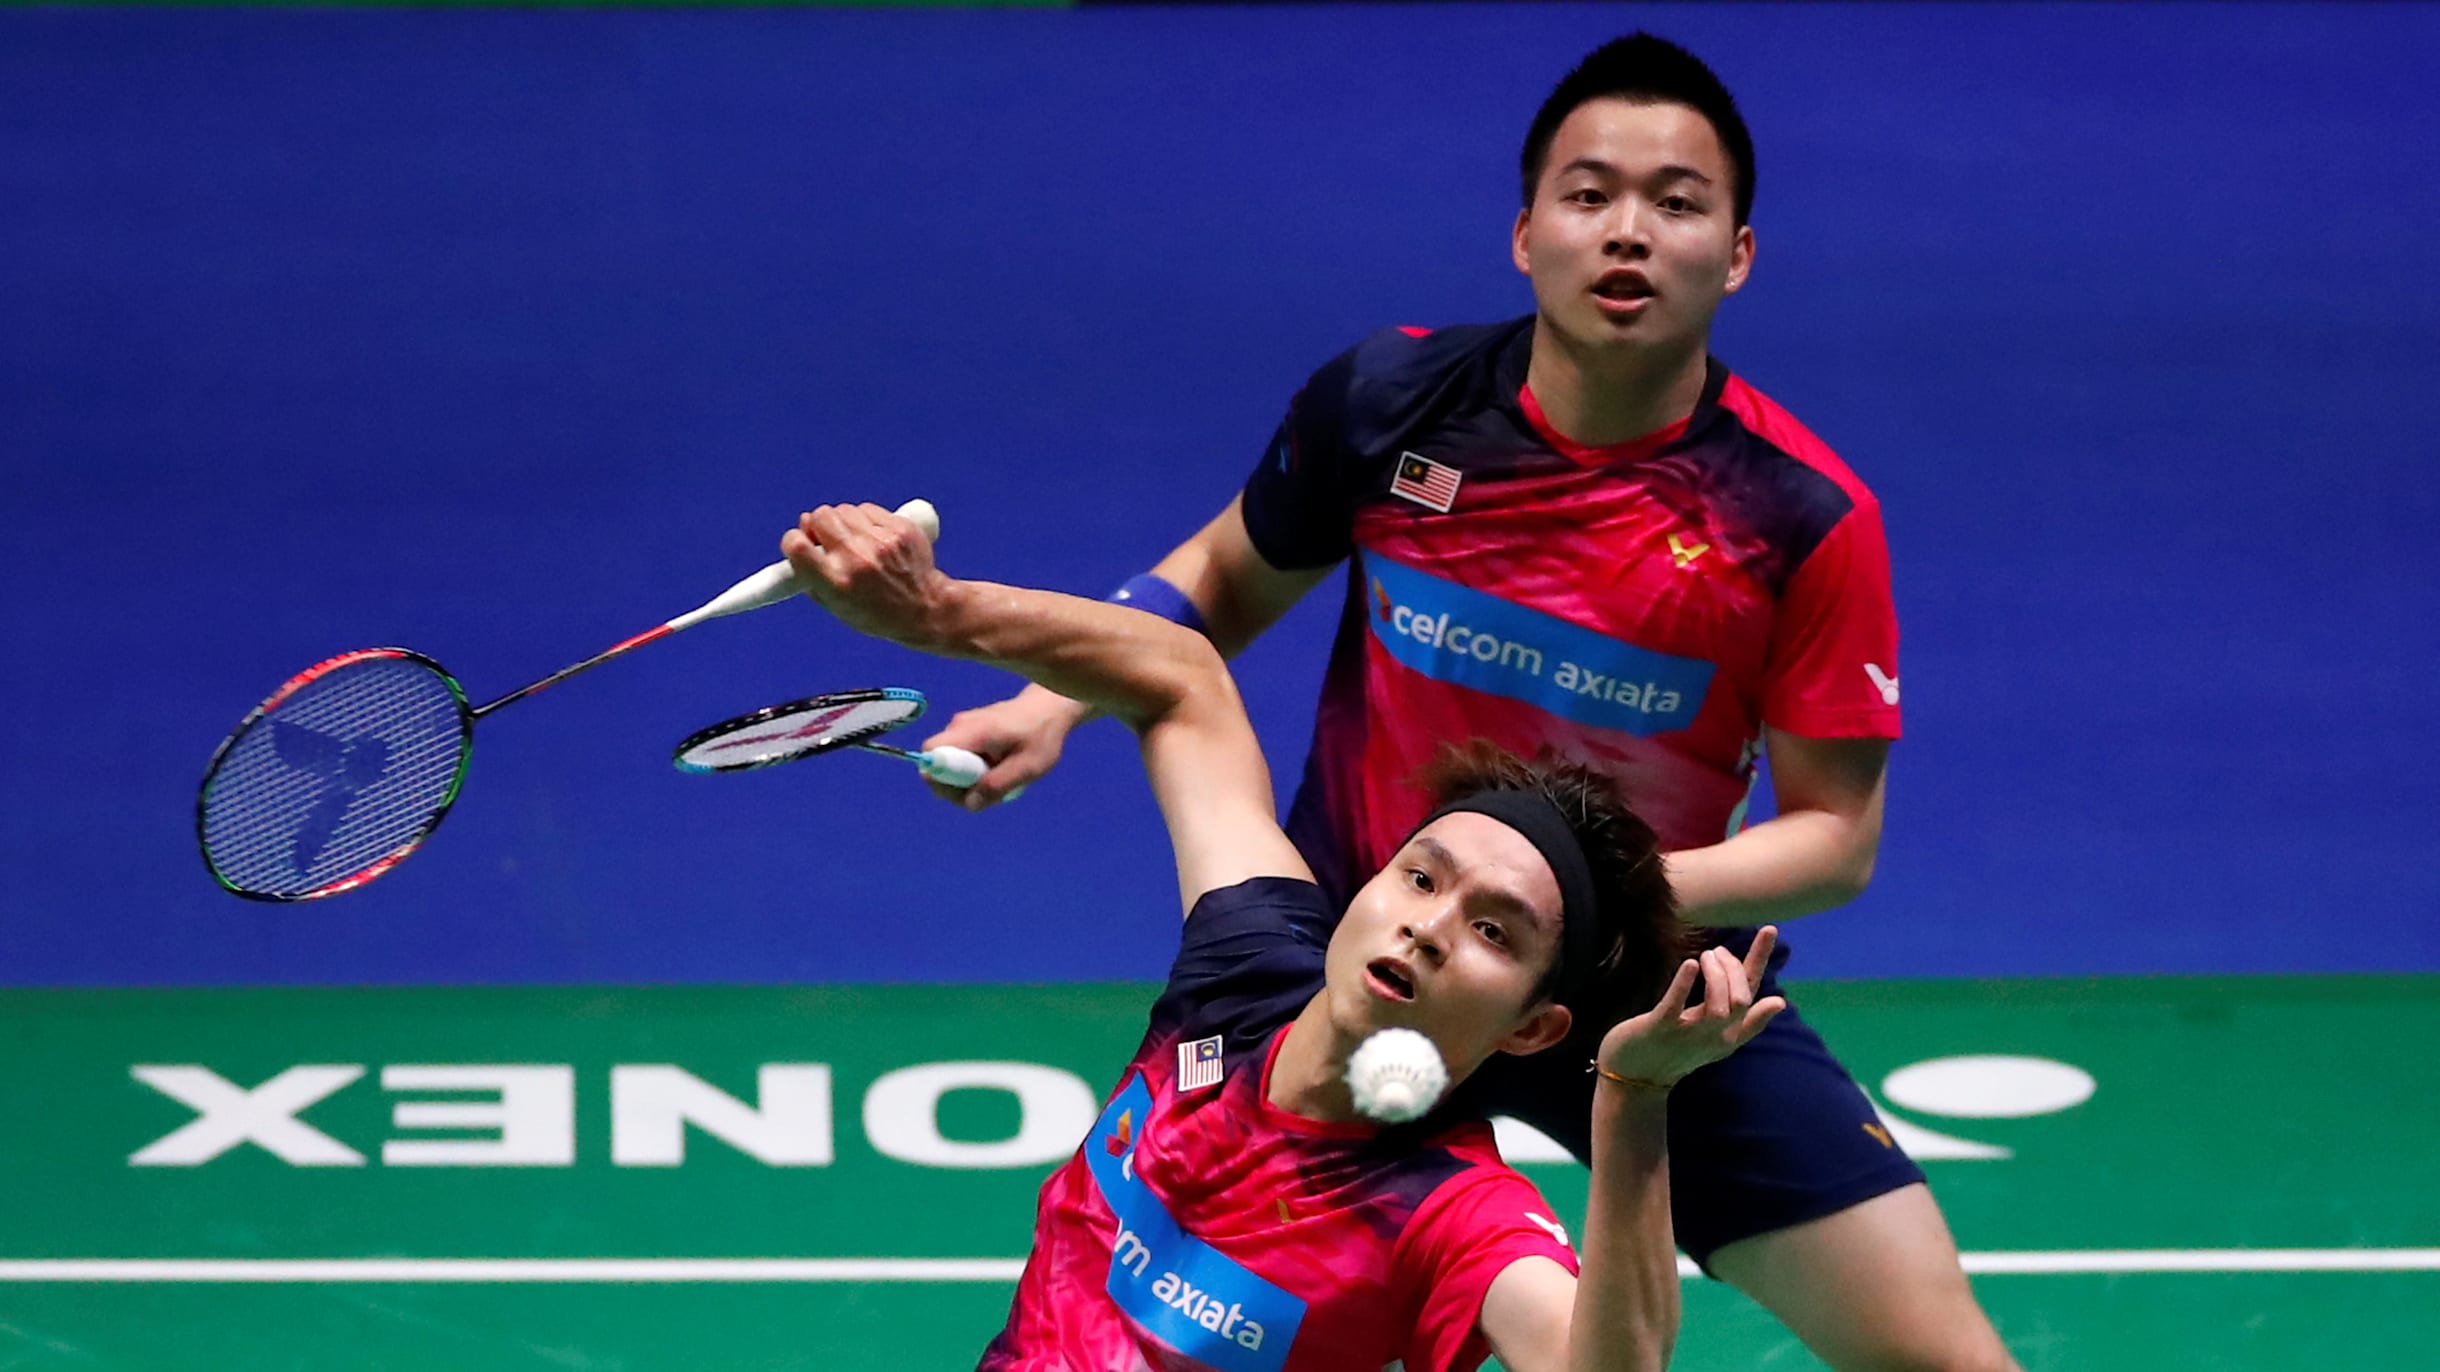 Aaron Chia and Soh Wooi Yik aiming to strike gold at Olympic Games